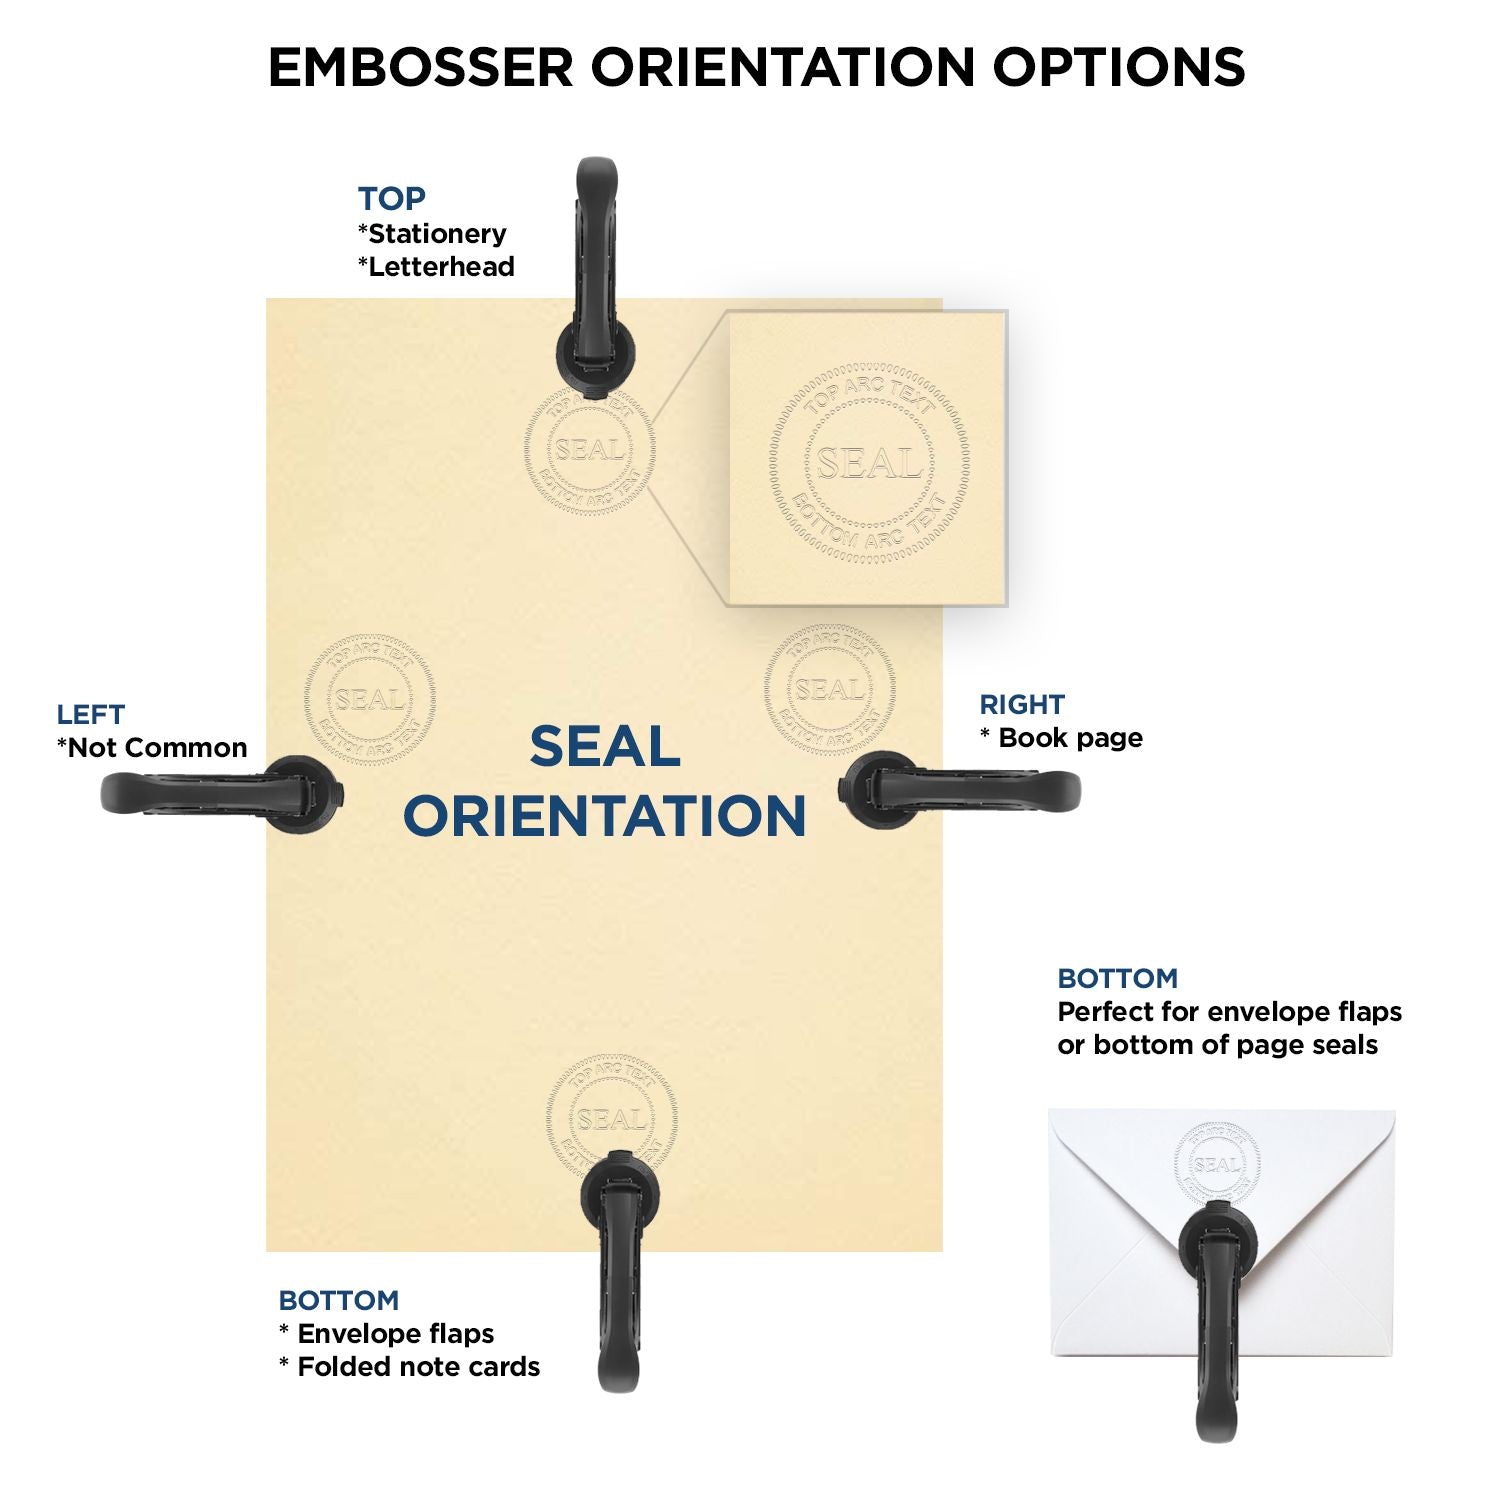 An infographic for the Extended Long Reach Tennessee Surveyor Embosser showing embosser orientation, this is showing examples of a top, bottom, right and left insert.